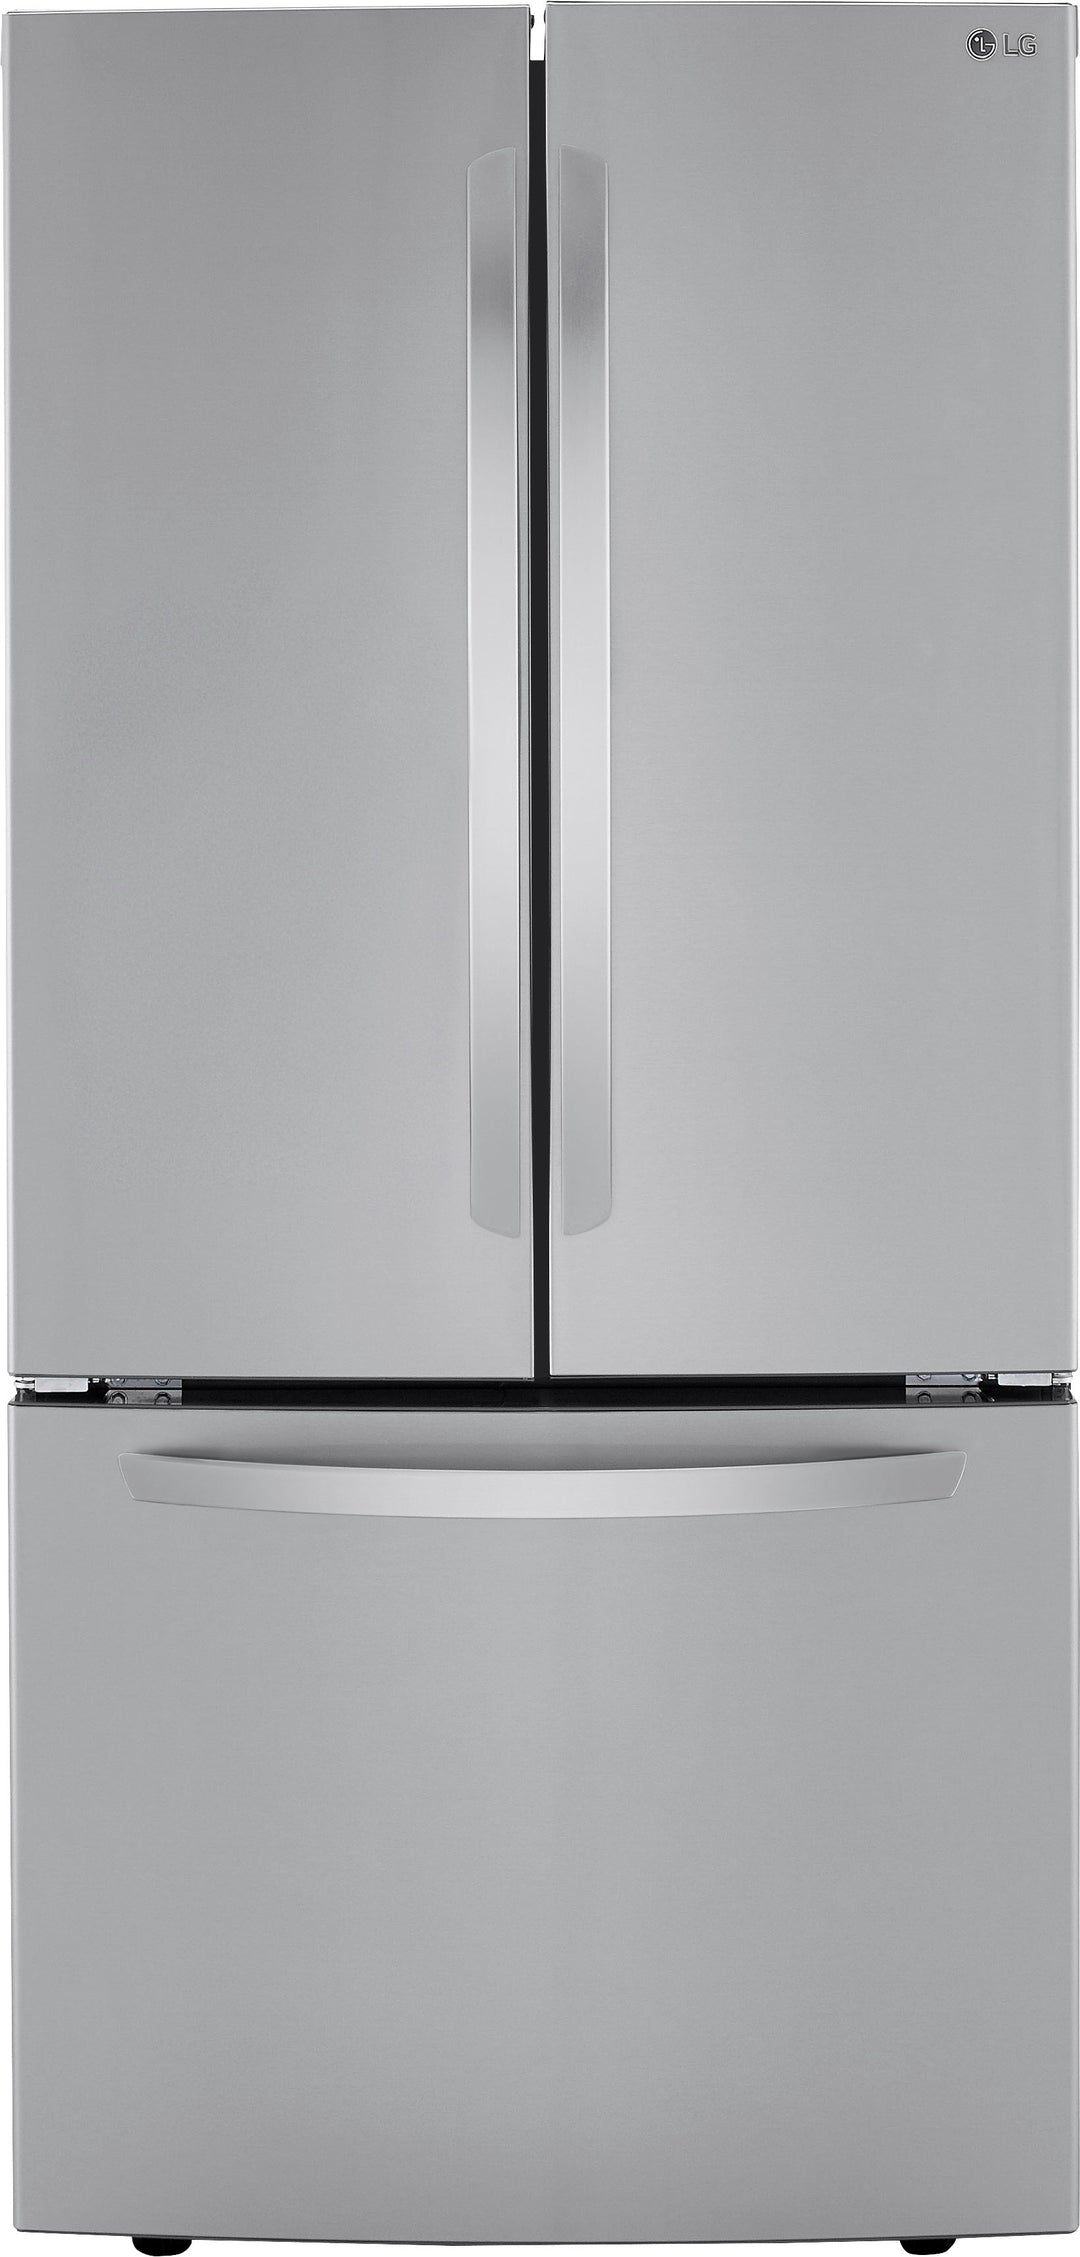 LG - 25.1 Cu. Ft. French Door Refrigerator with Ice Maker - Stainless steel_0